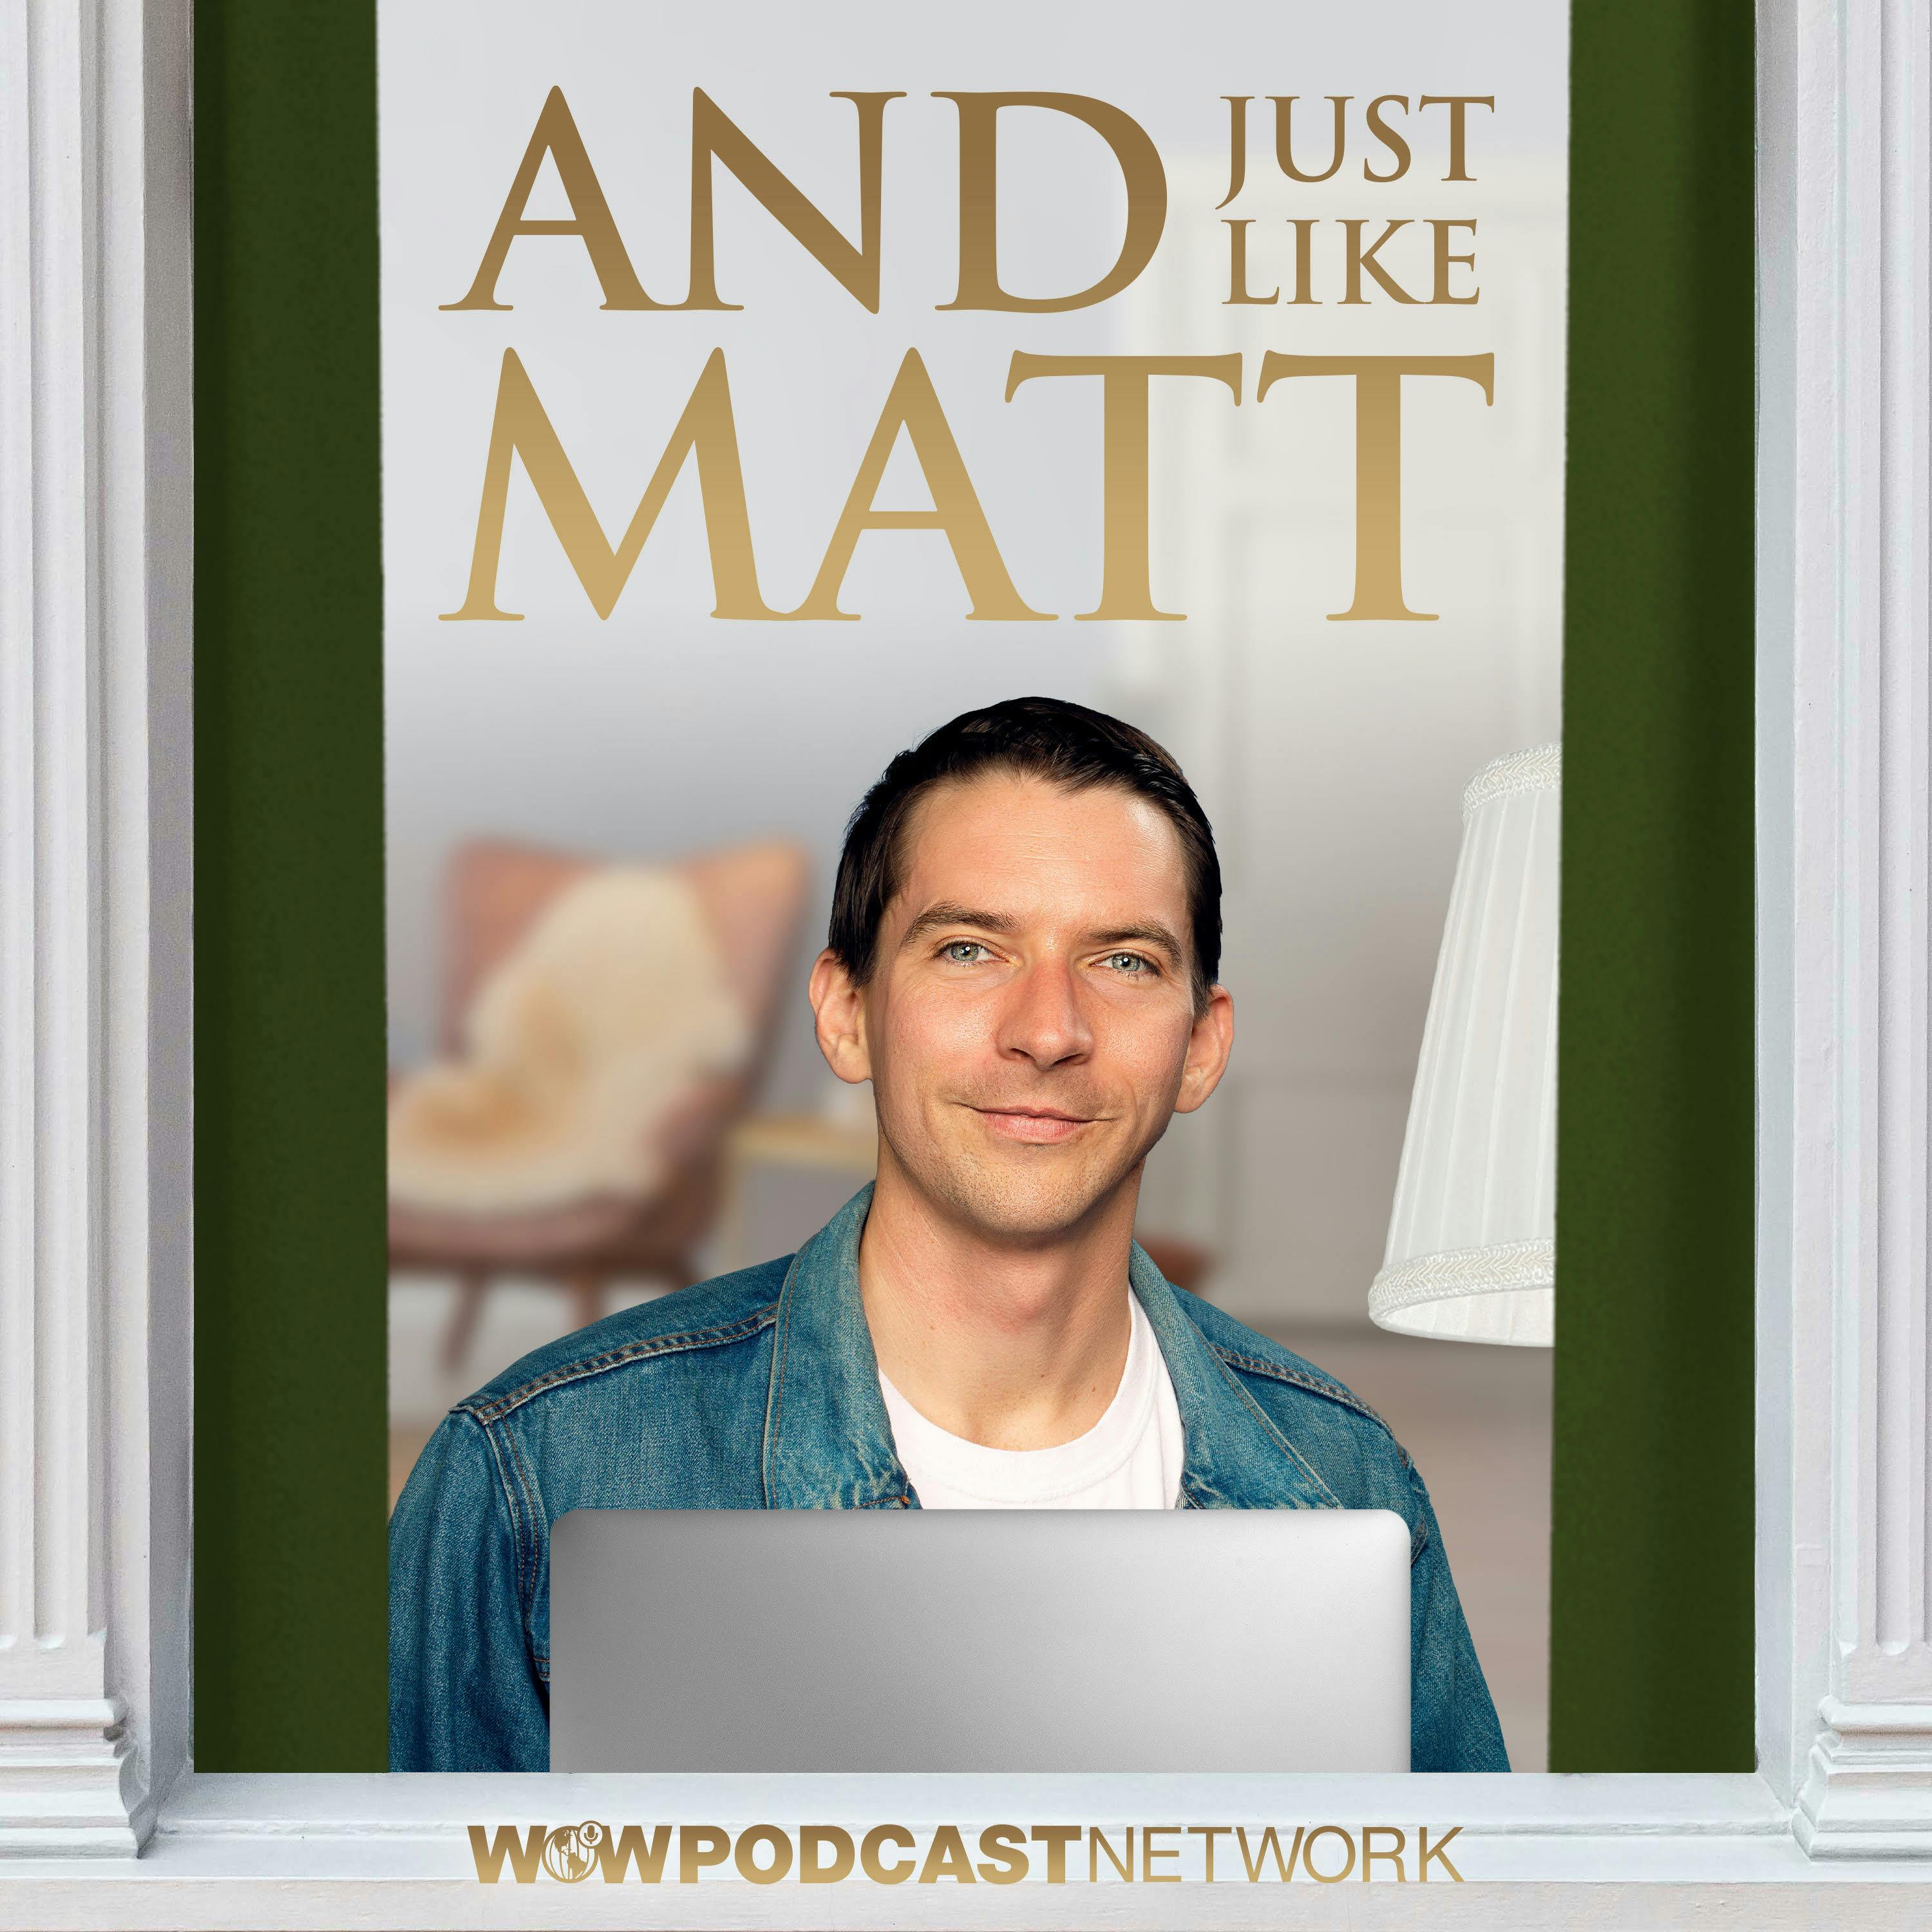 And Just Like Matt podcast show image